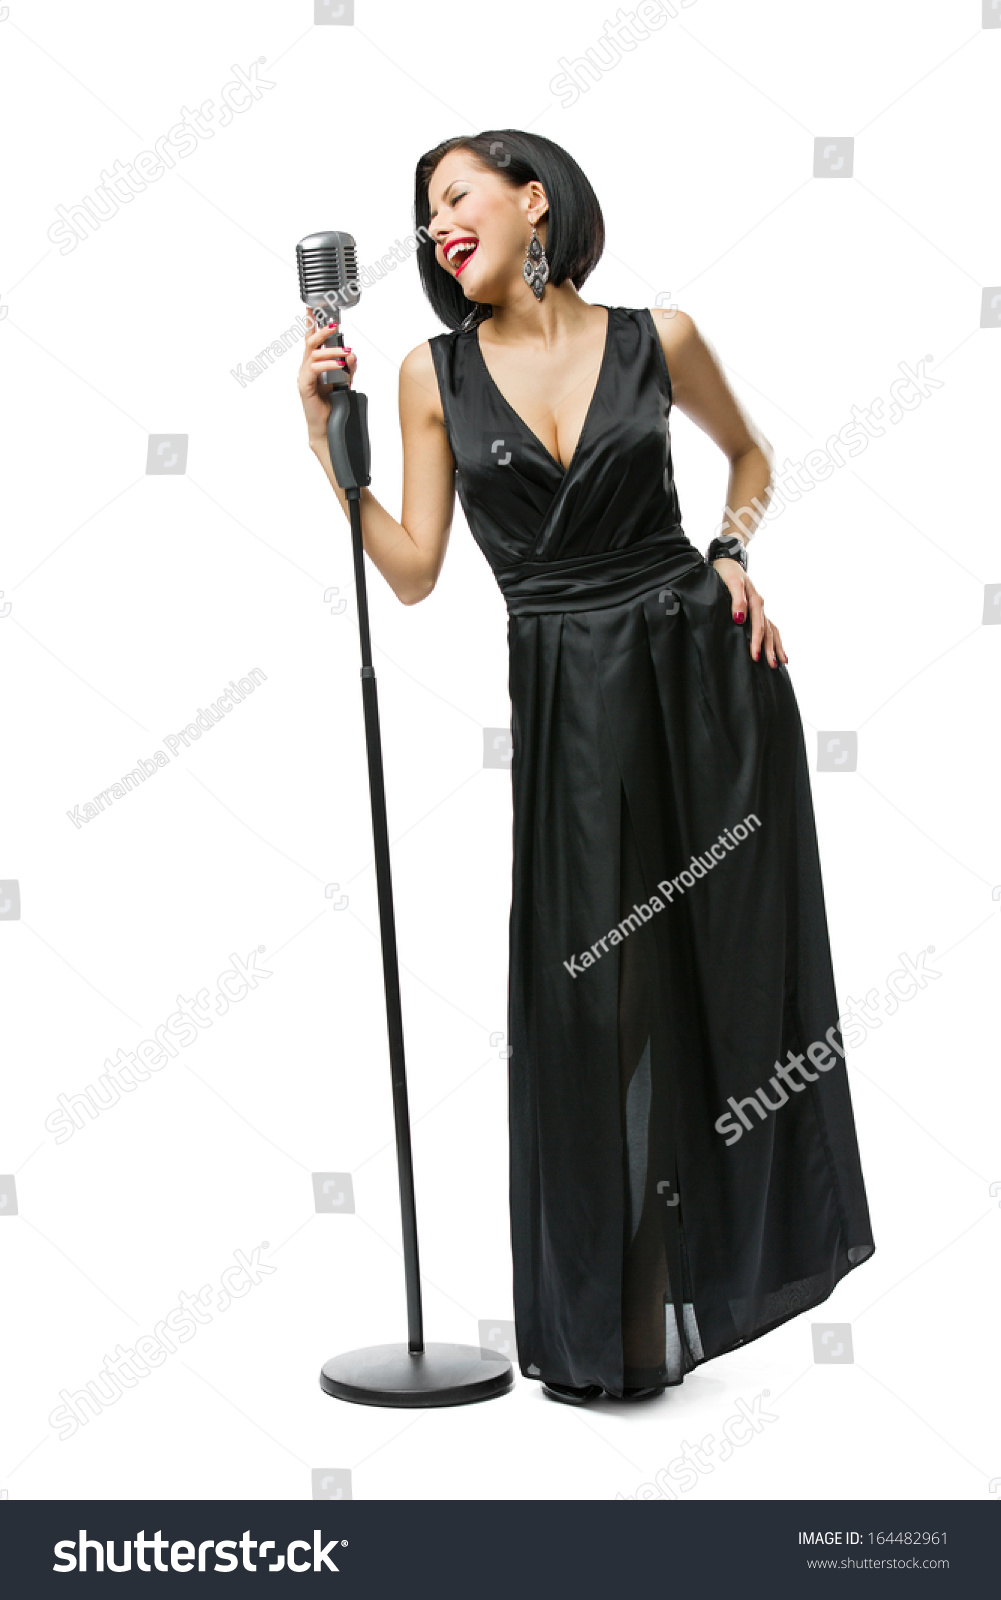 Full-length portrait of woman musician wearing long black evening dress and holding mic #164482961